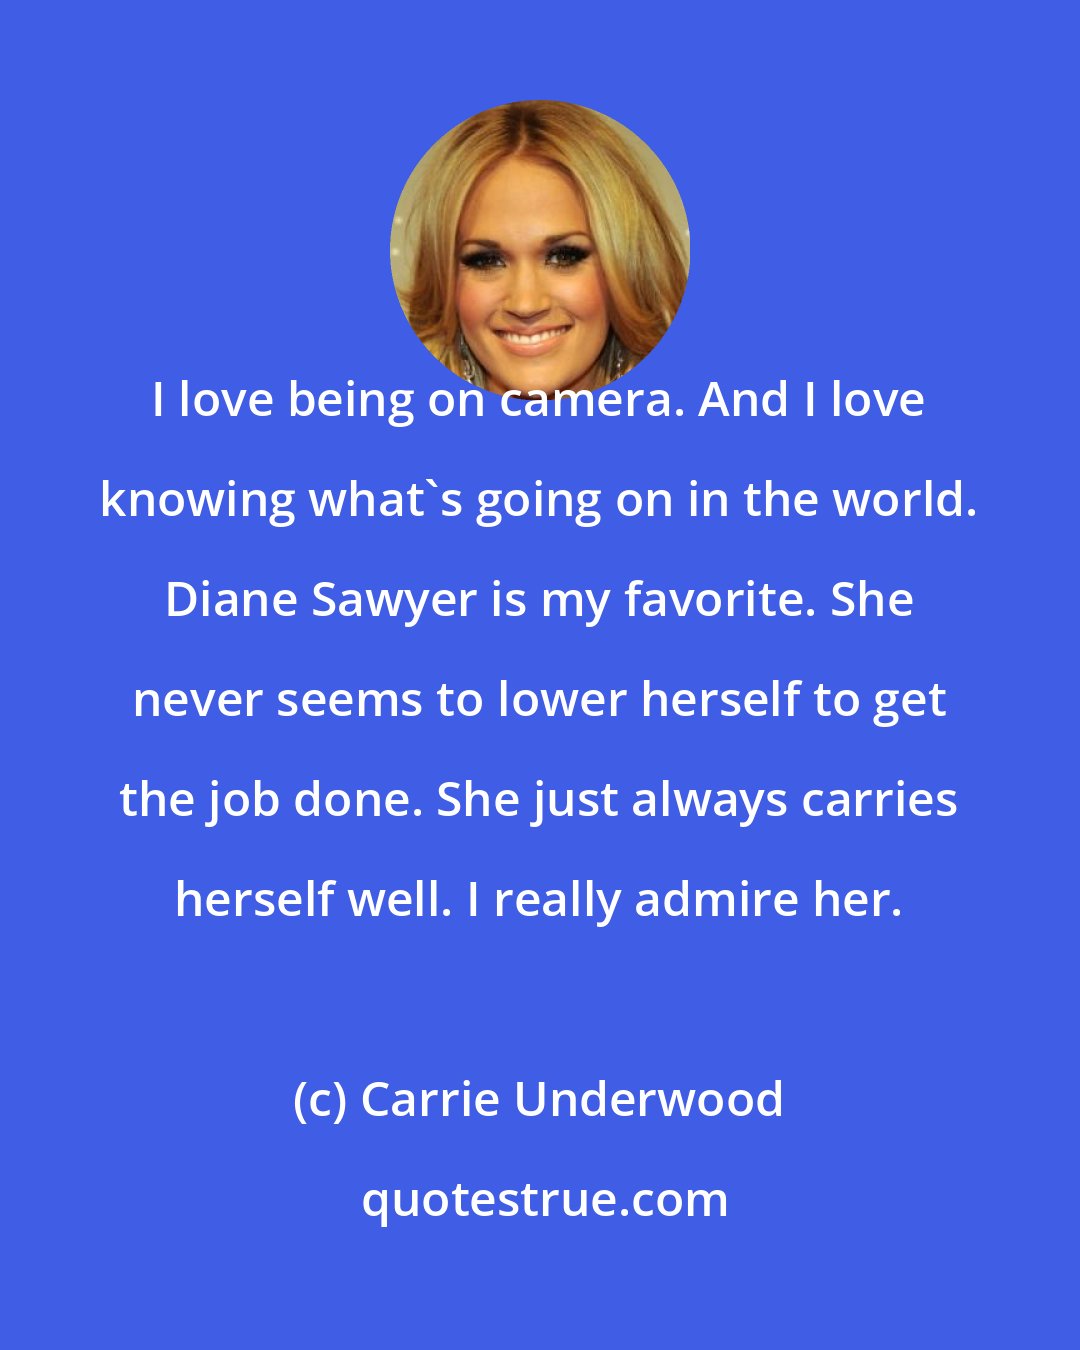 Carrie Underwood: I love being on camera. And I love knowing what's going on in the world. Diane Sawyer is my favorite. She never seems to lower herself to get the job done. She just always carries herself well. I really admire her.